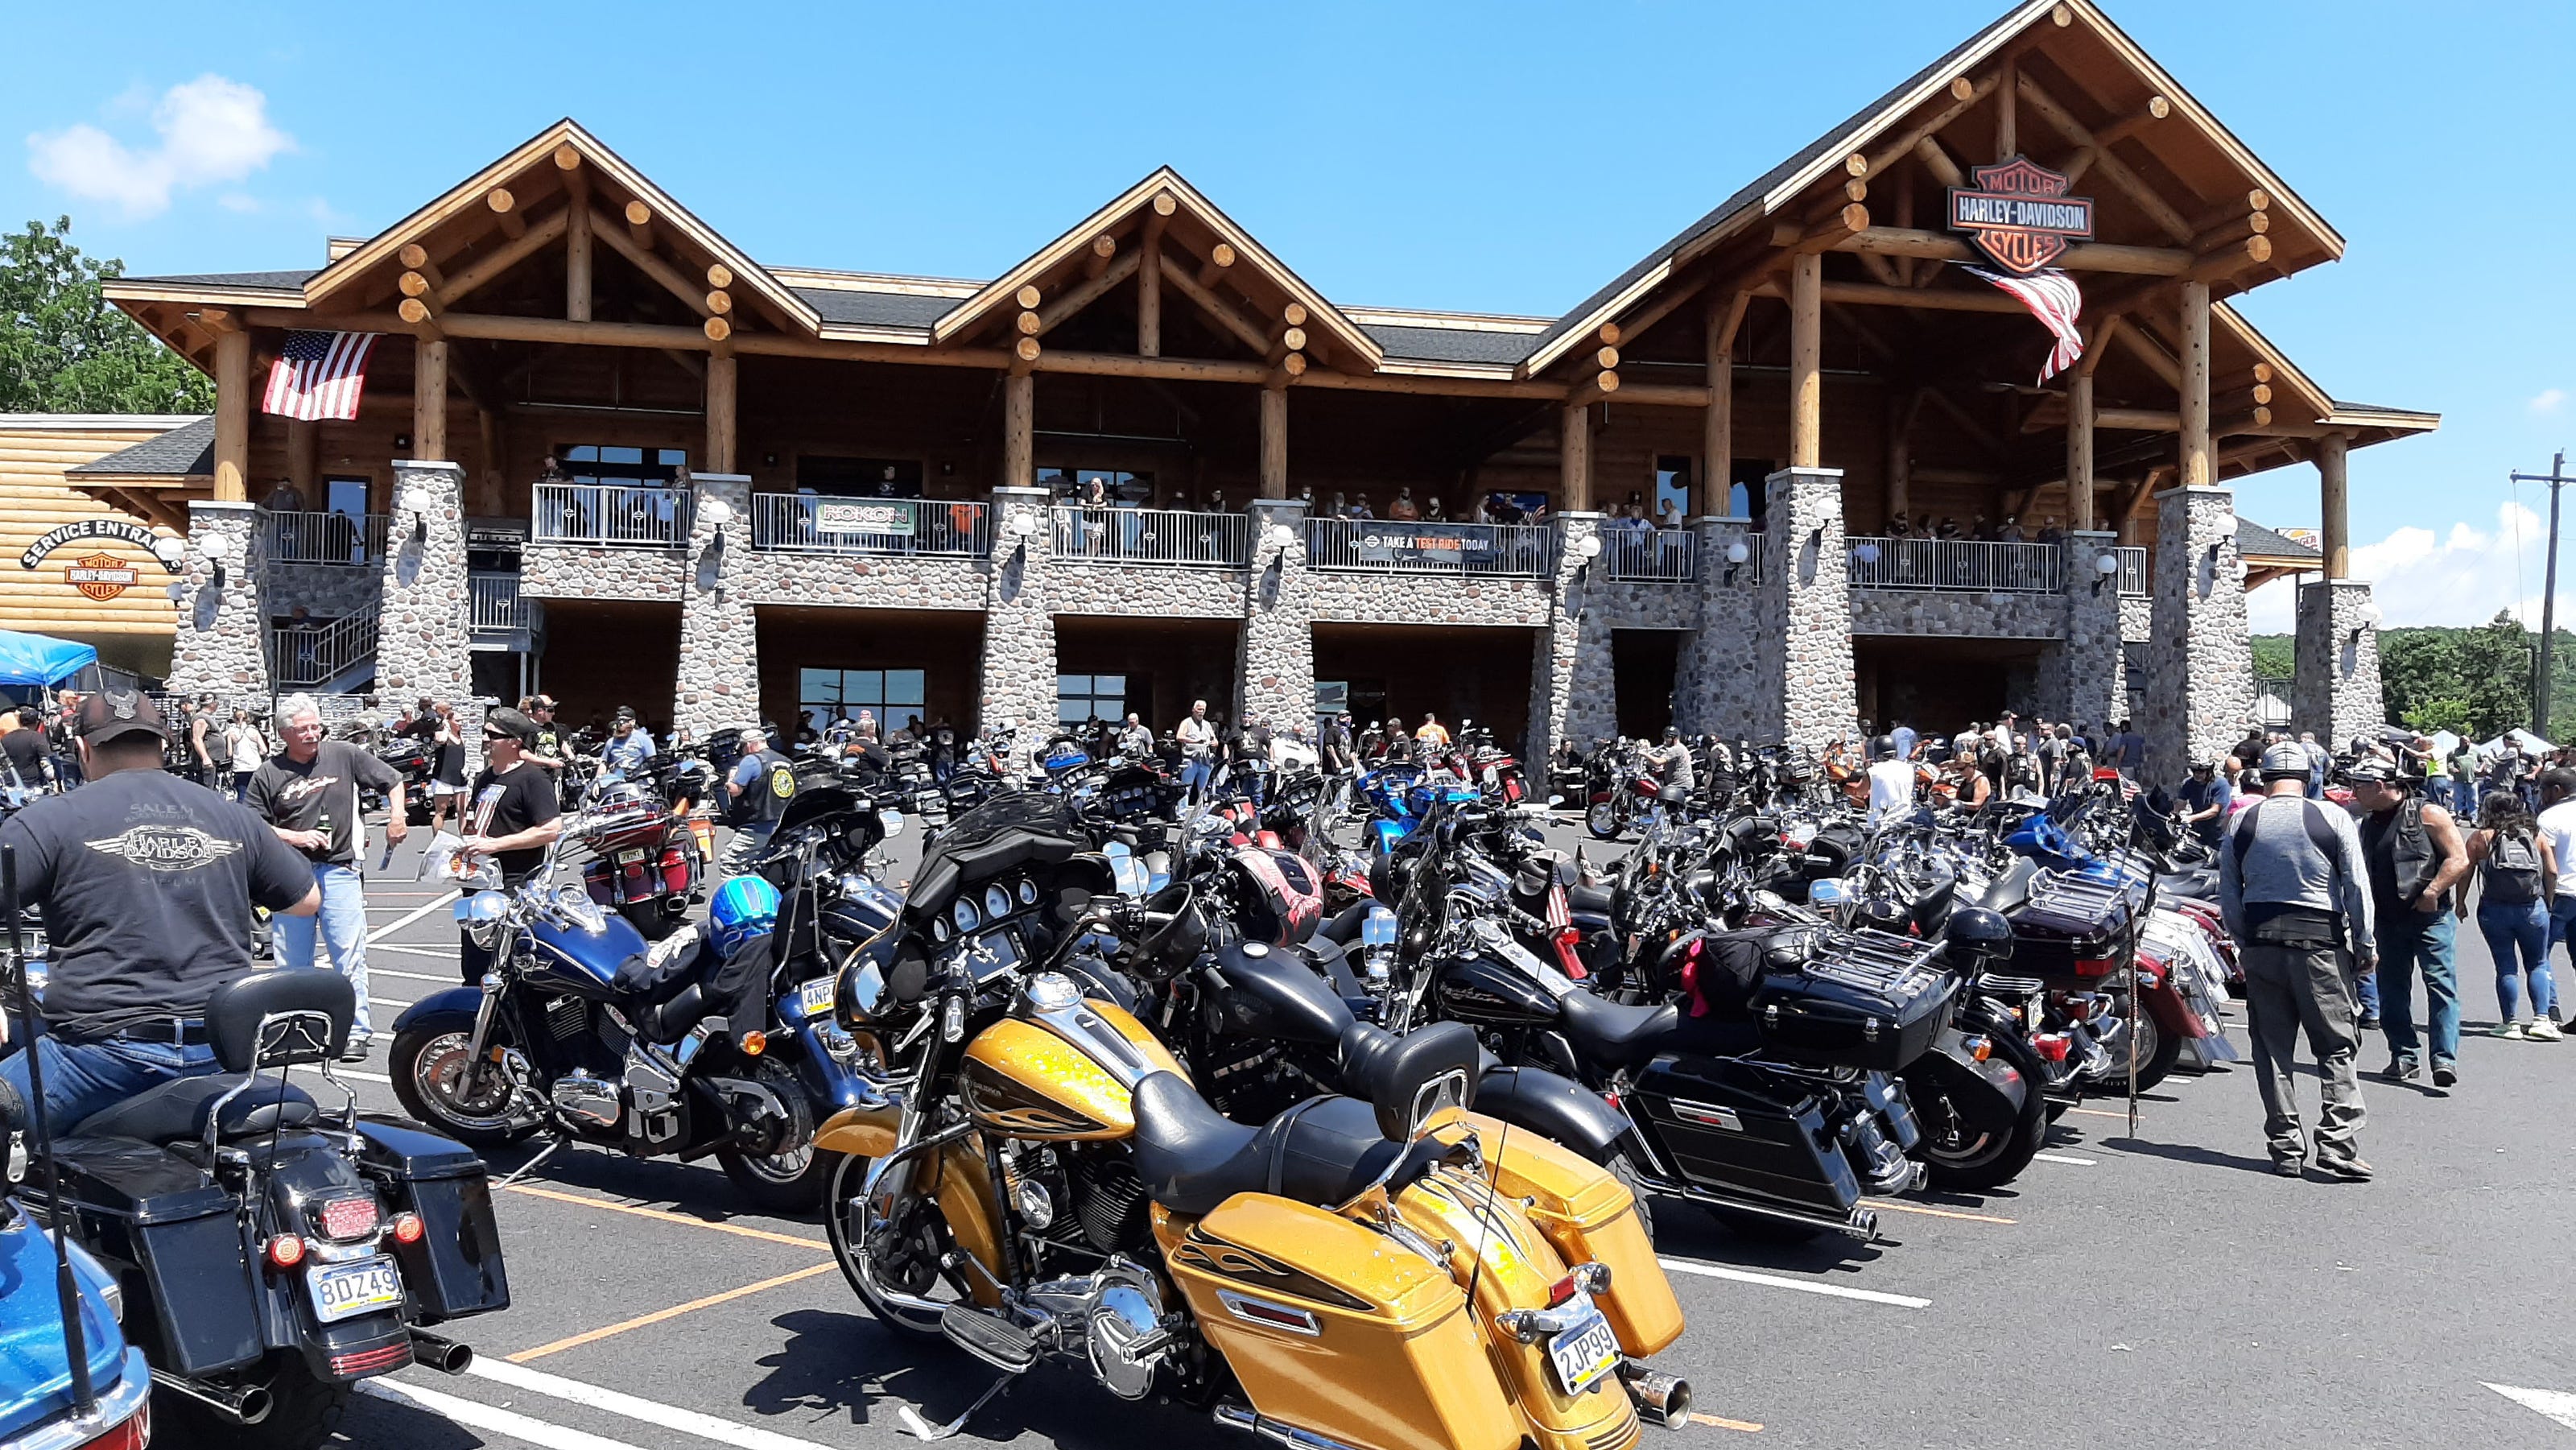 New Harley-Davidson dealership opens in Tannersville, Pa.